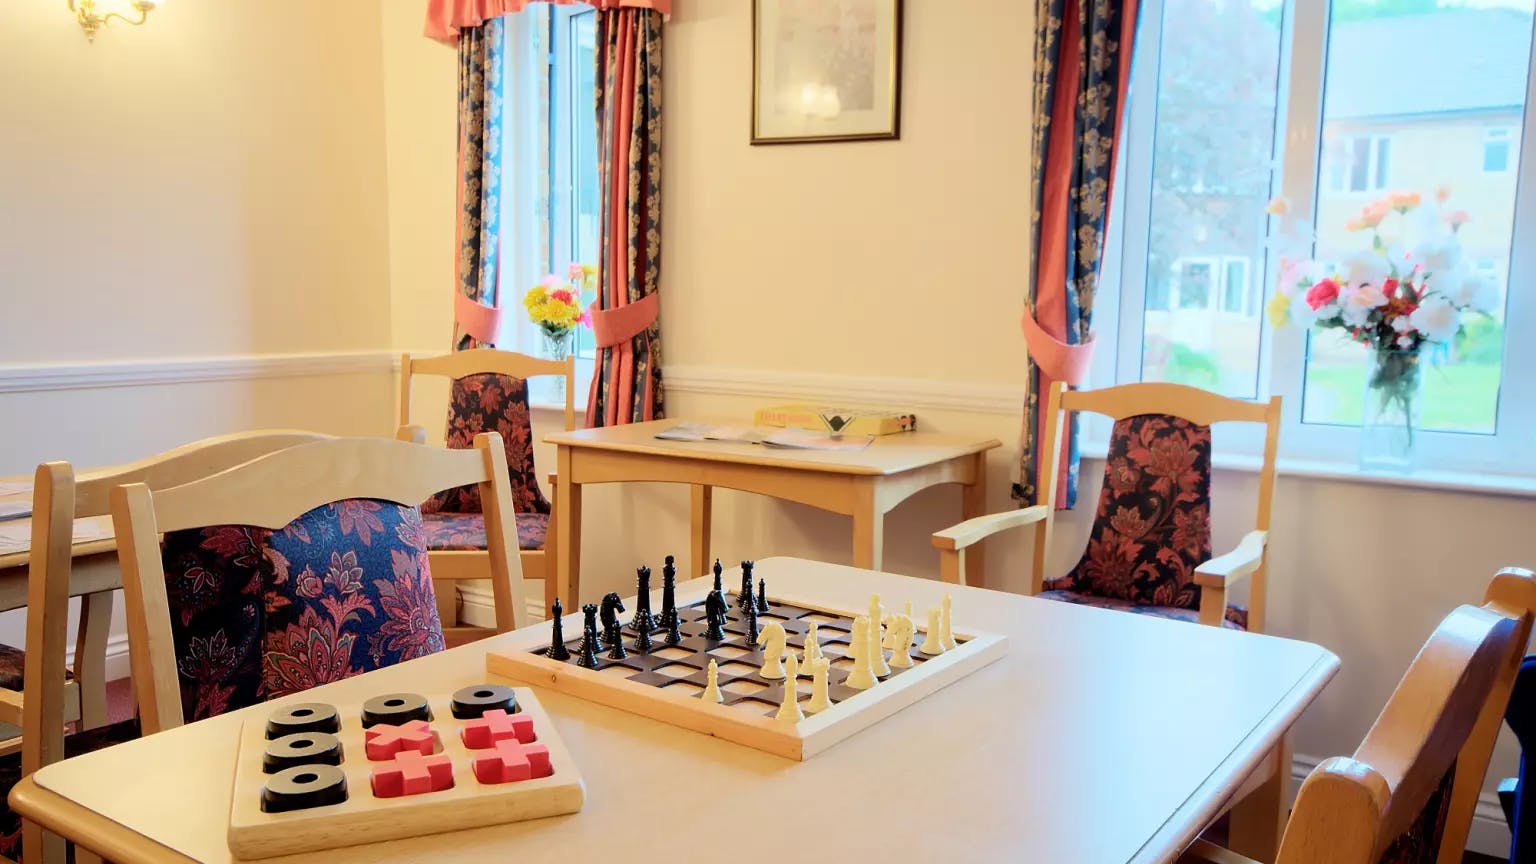 Activities of Fosse House care home in St Albans, Hertfordshire